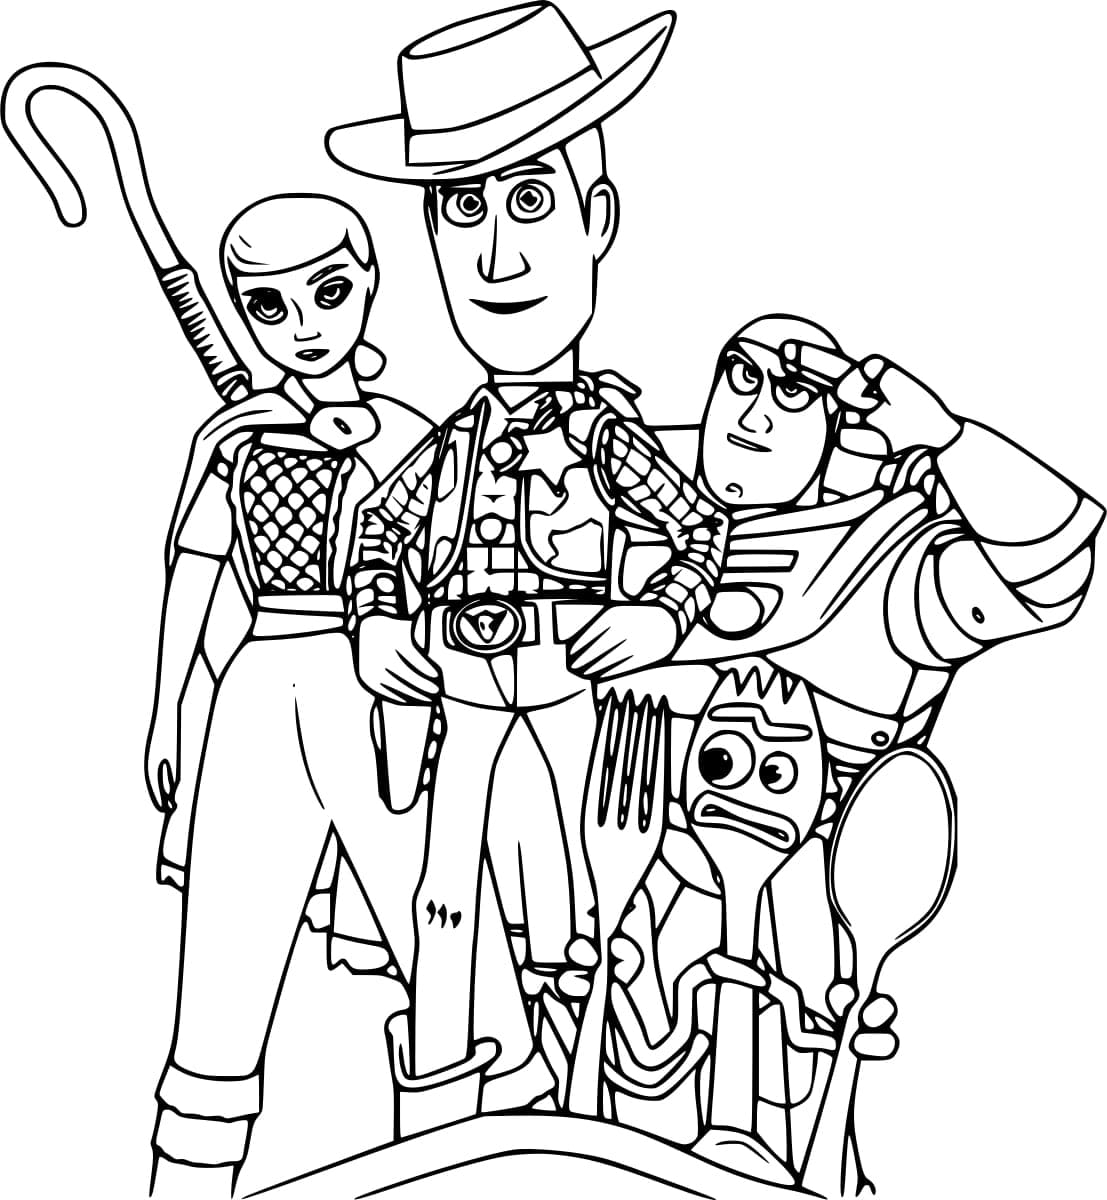 Toy Story 4 coloring pages - ColoringLib